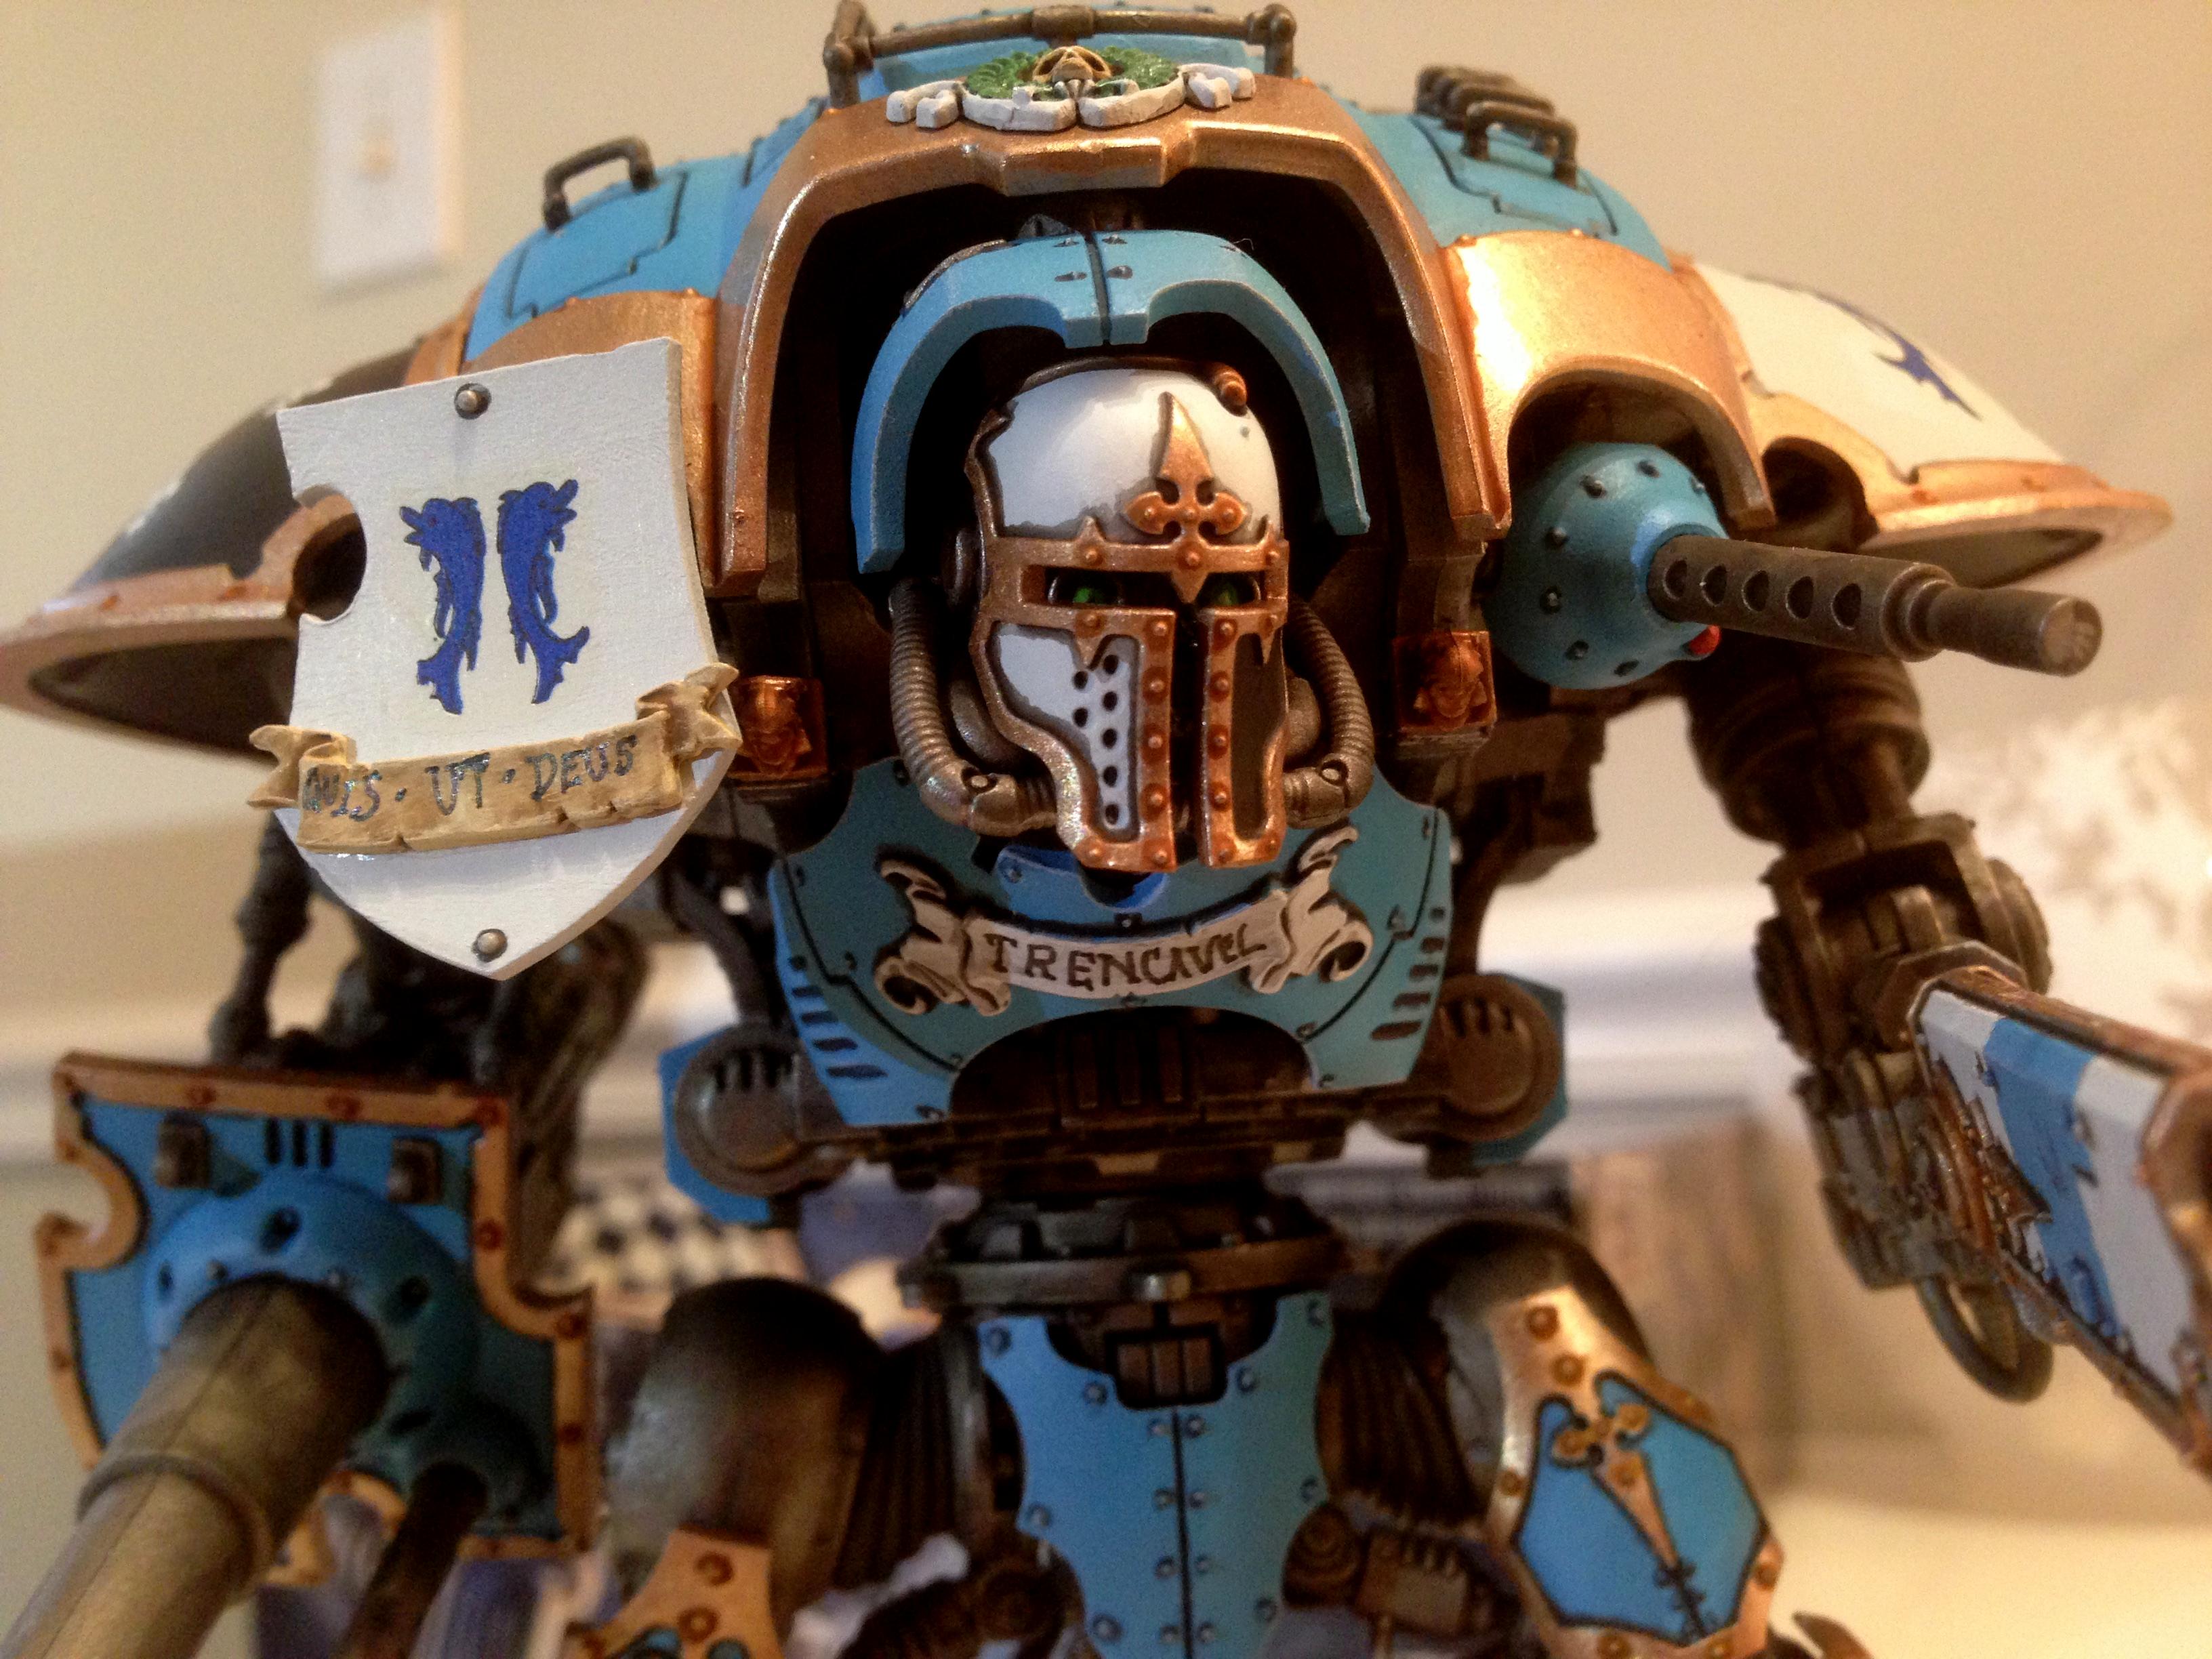 Blue, Dolphin, House, Imperial, Imperial Knights, Knights, Paladin, Work In Progress